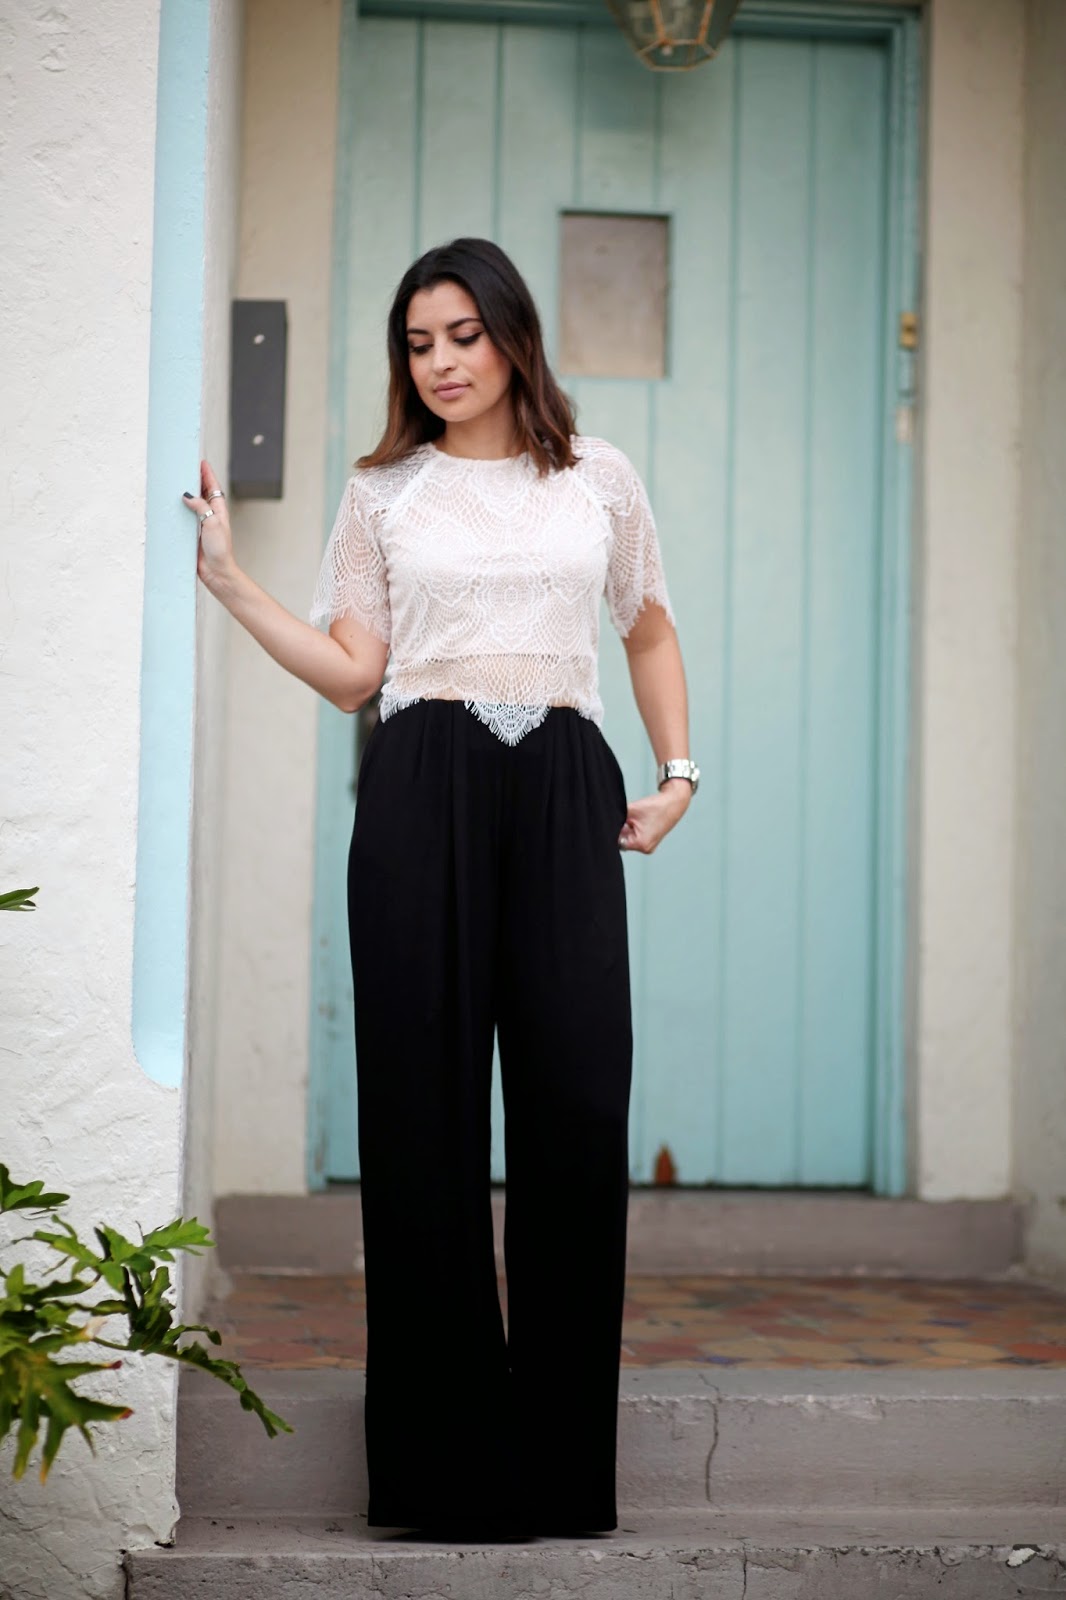 AFS: Wide Leg Pants for the WIN!